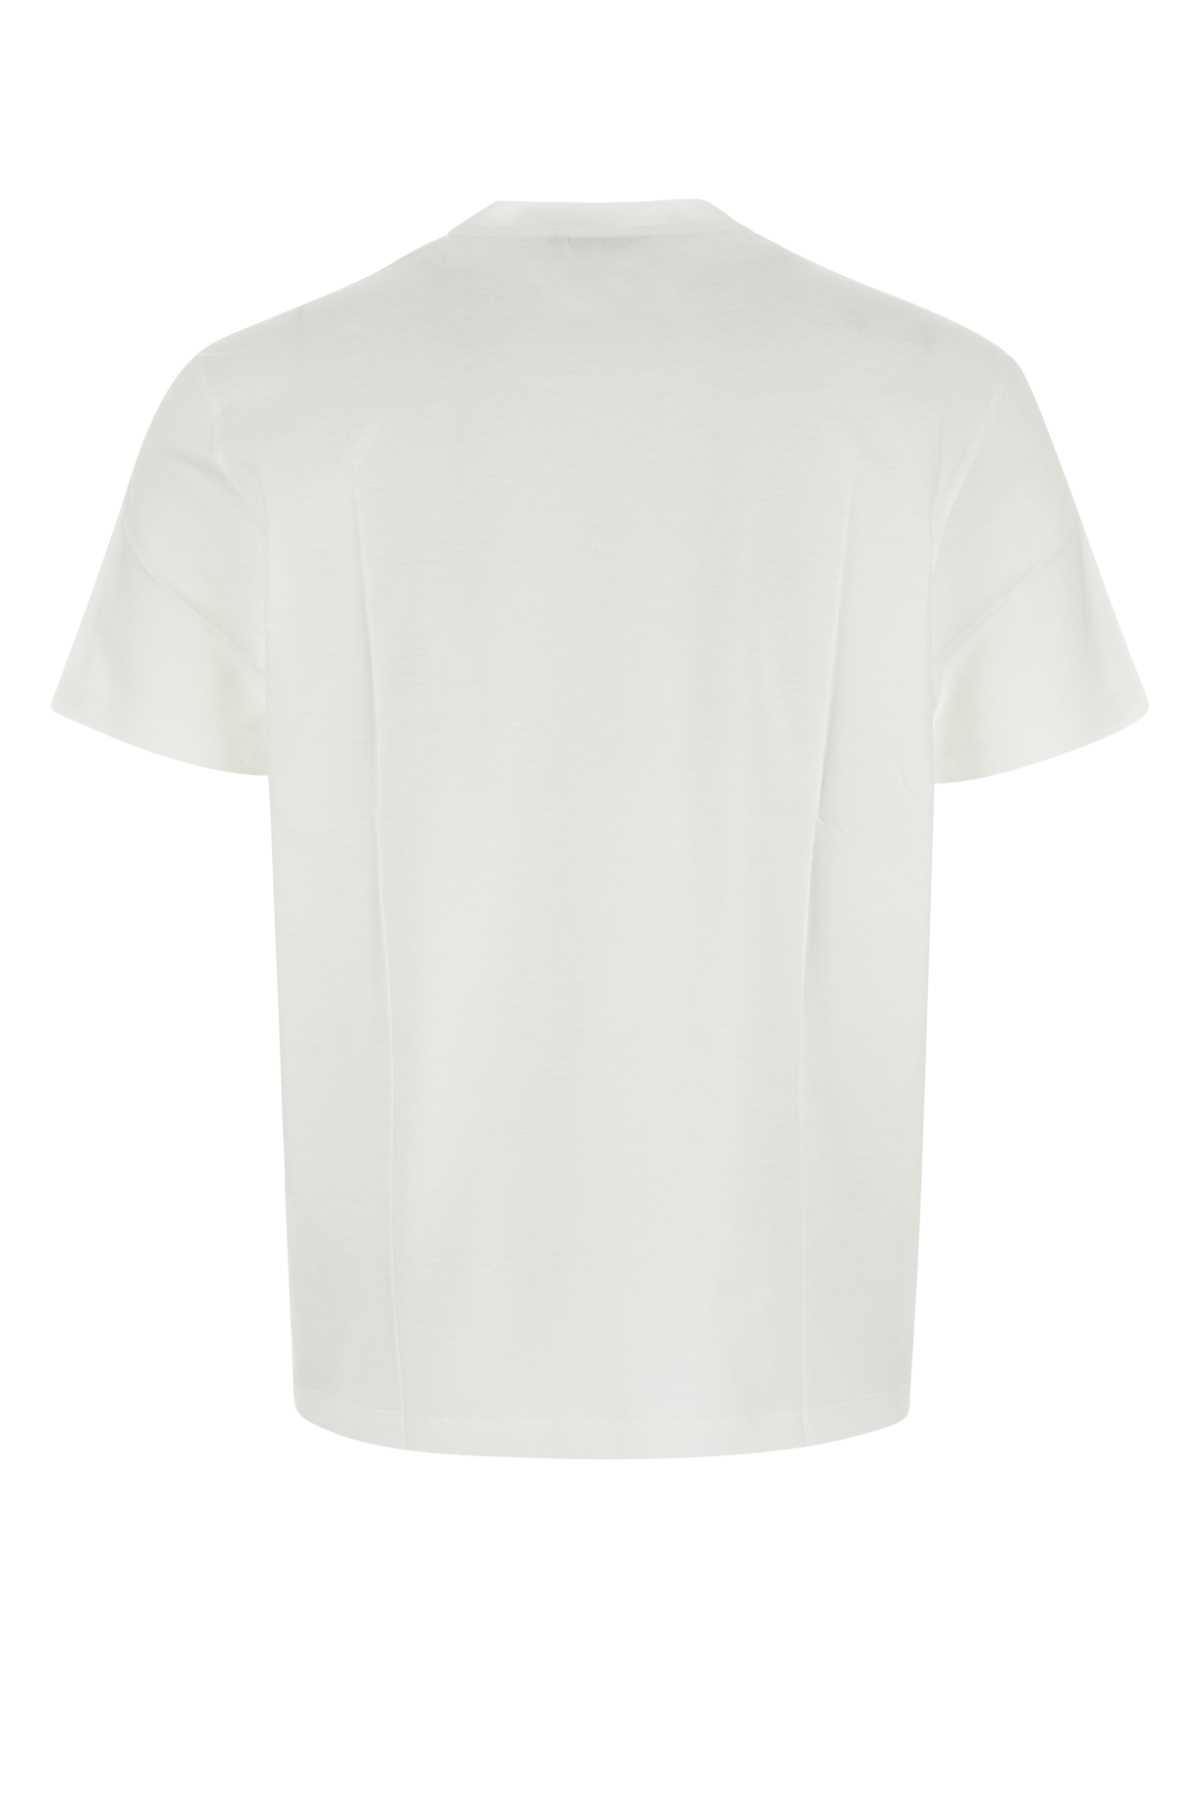 Versace White Cotton T-shirt In A1001